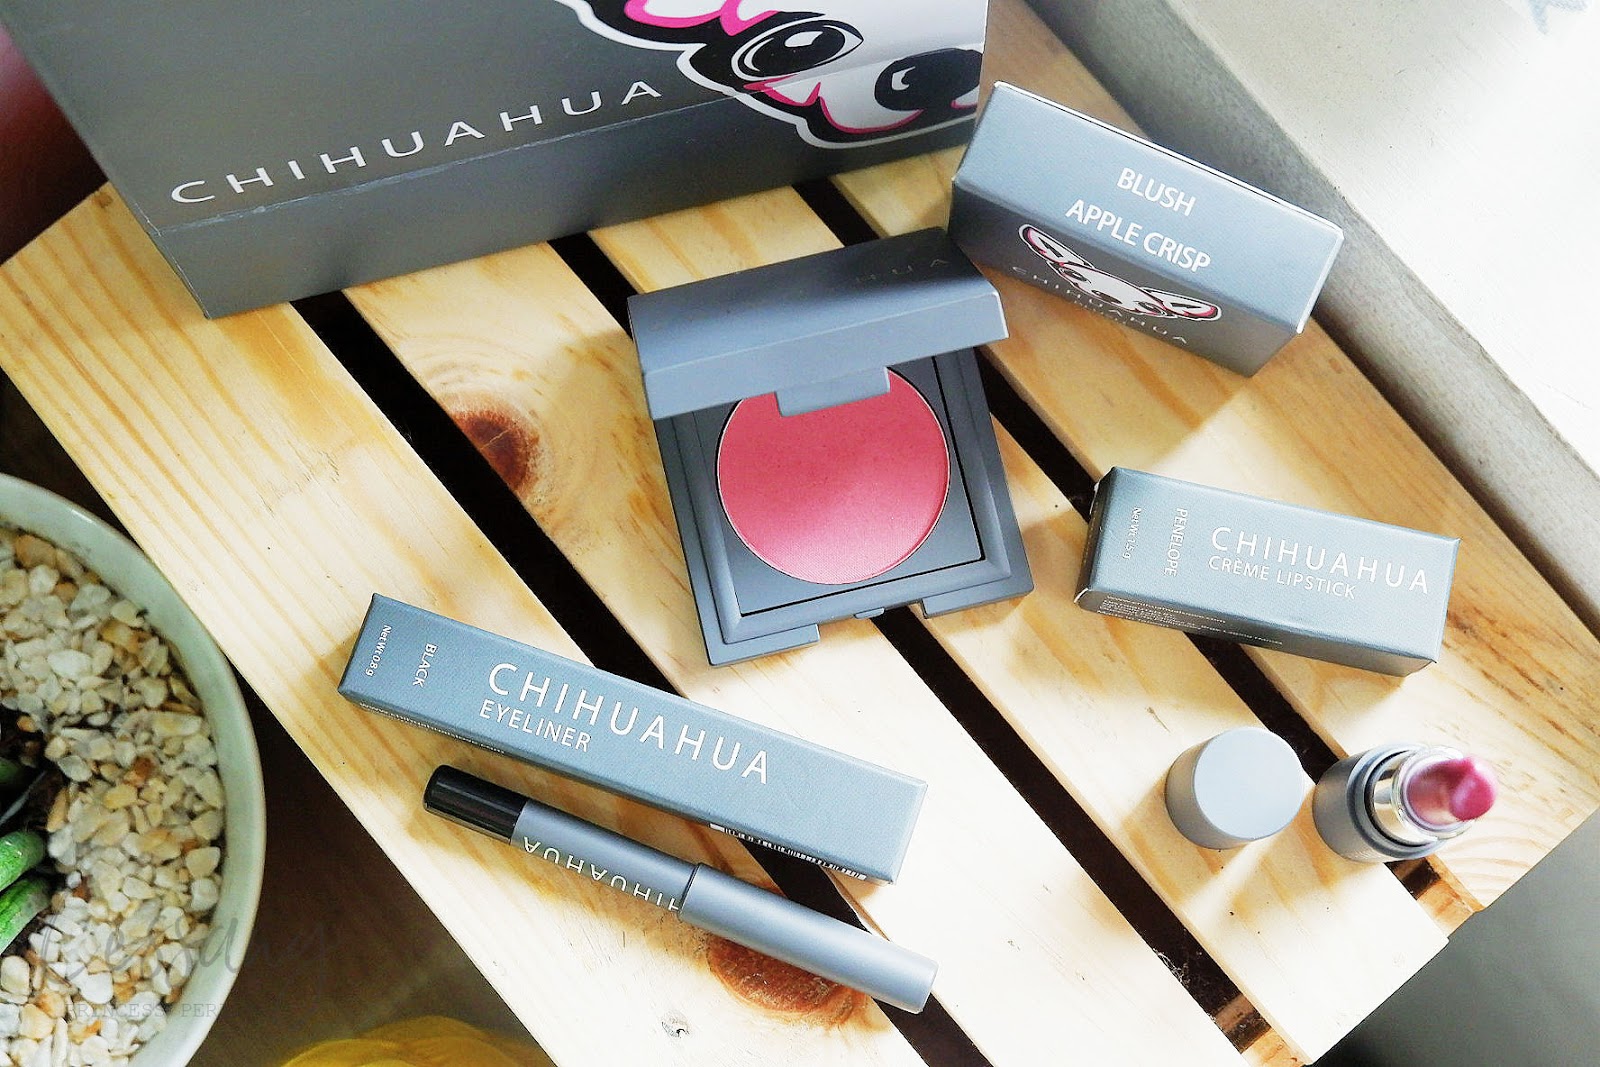 CHIHUAHUA COSMETICS: HALF THE PRICE, HALF THE SIZE! IS IT WORTH IT?